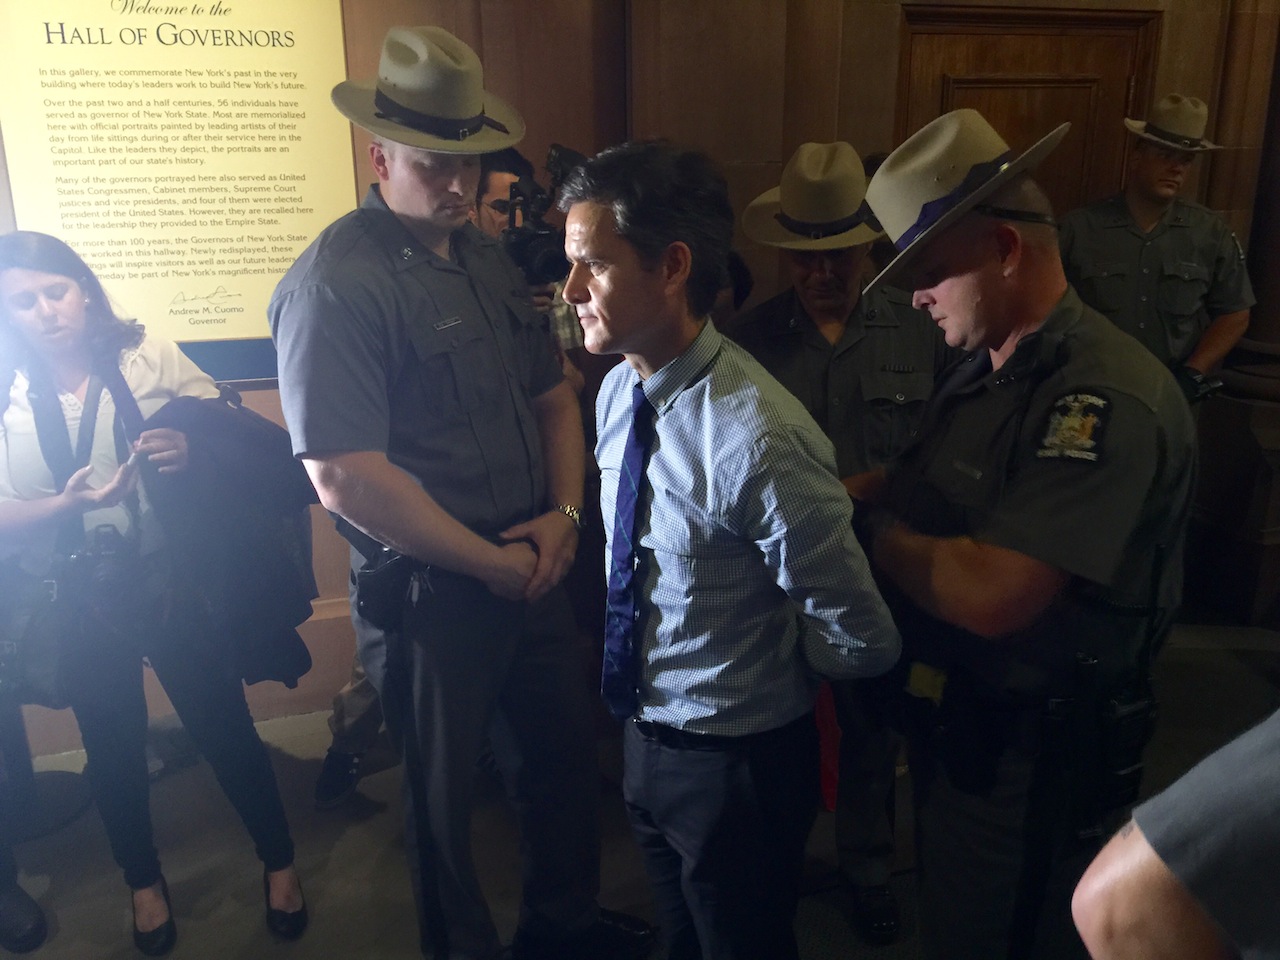 Brad Hoylman being arrested in the state capitol outside the governor's office.